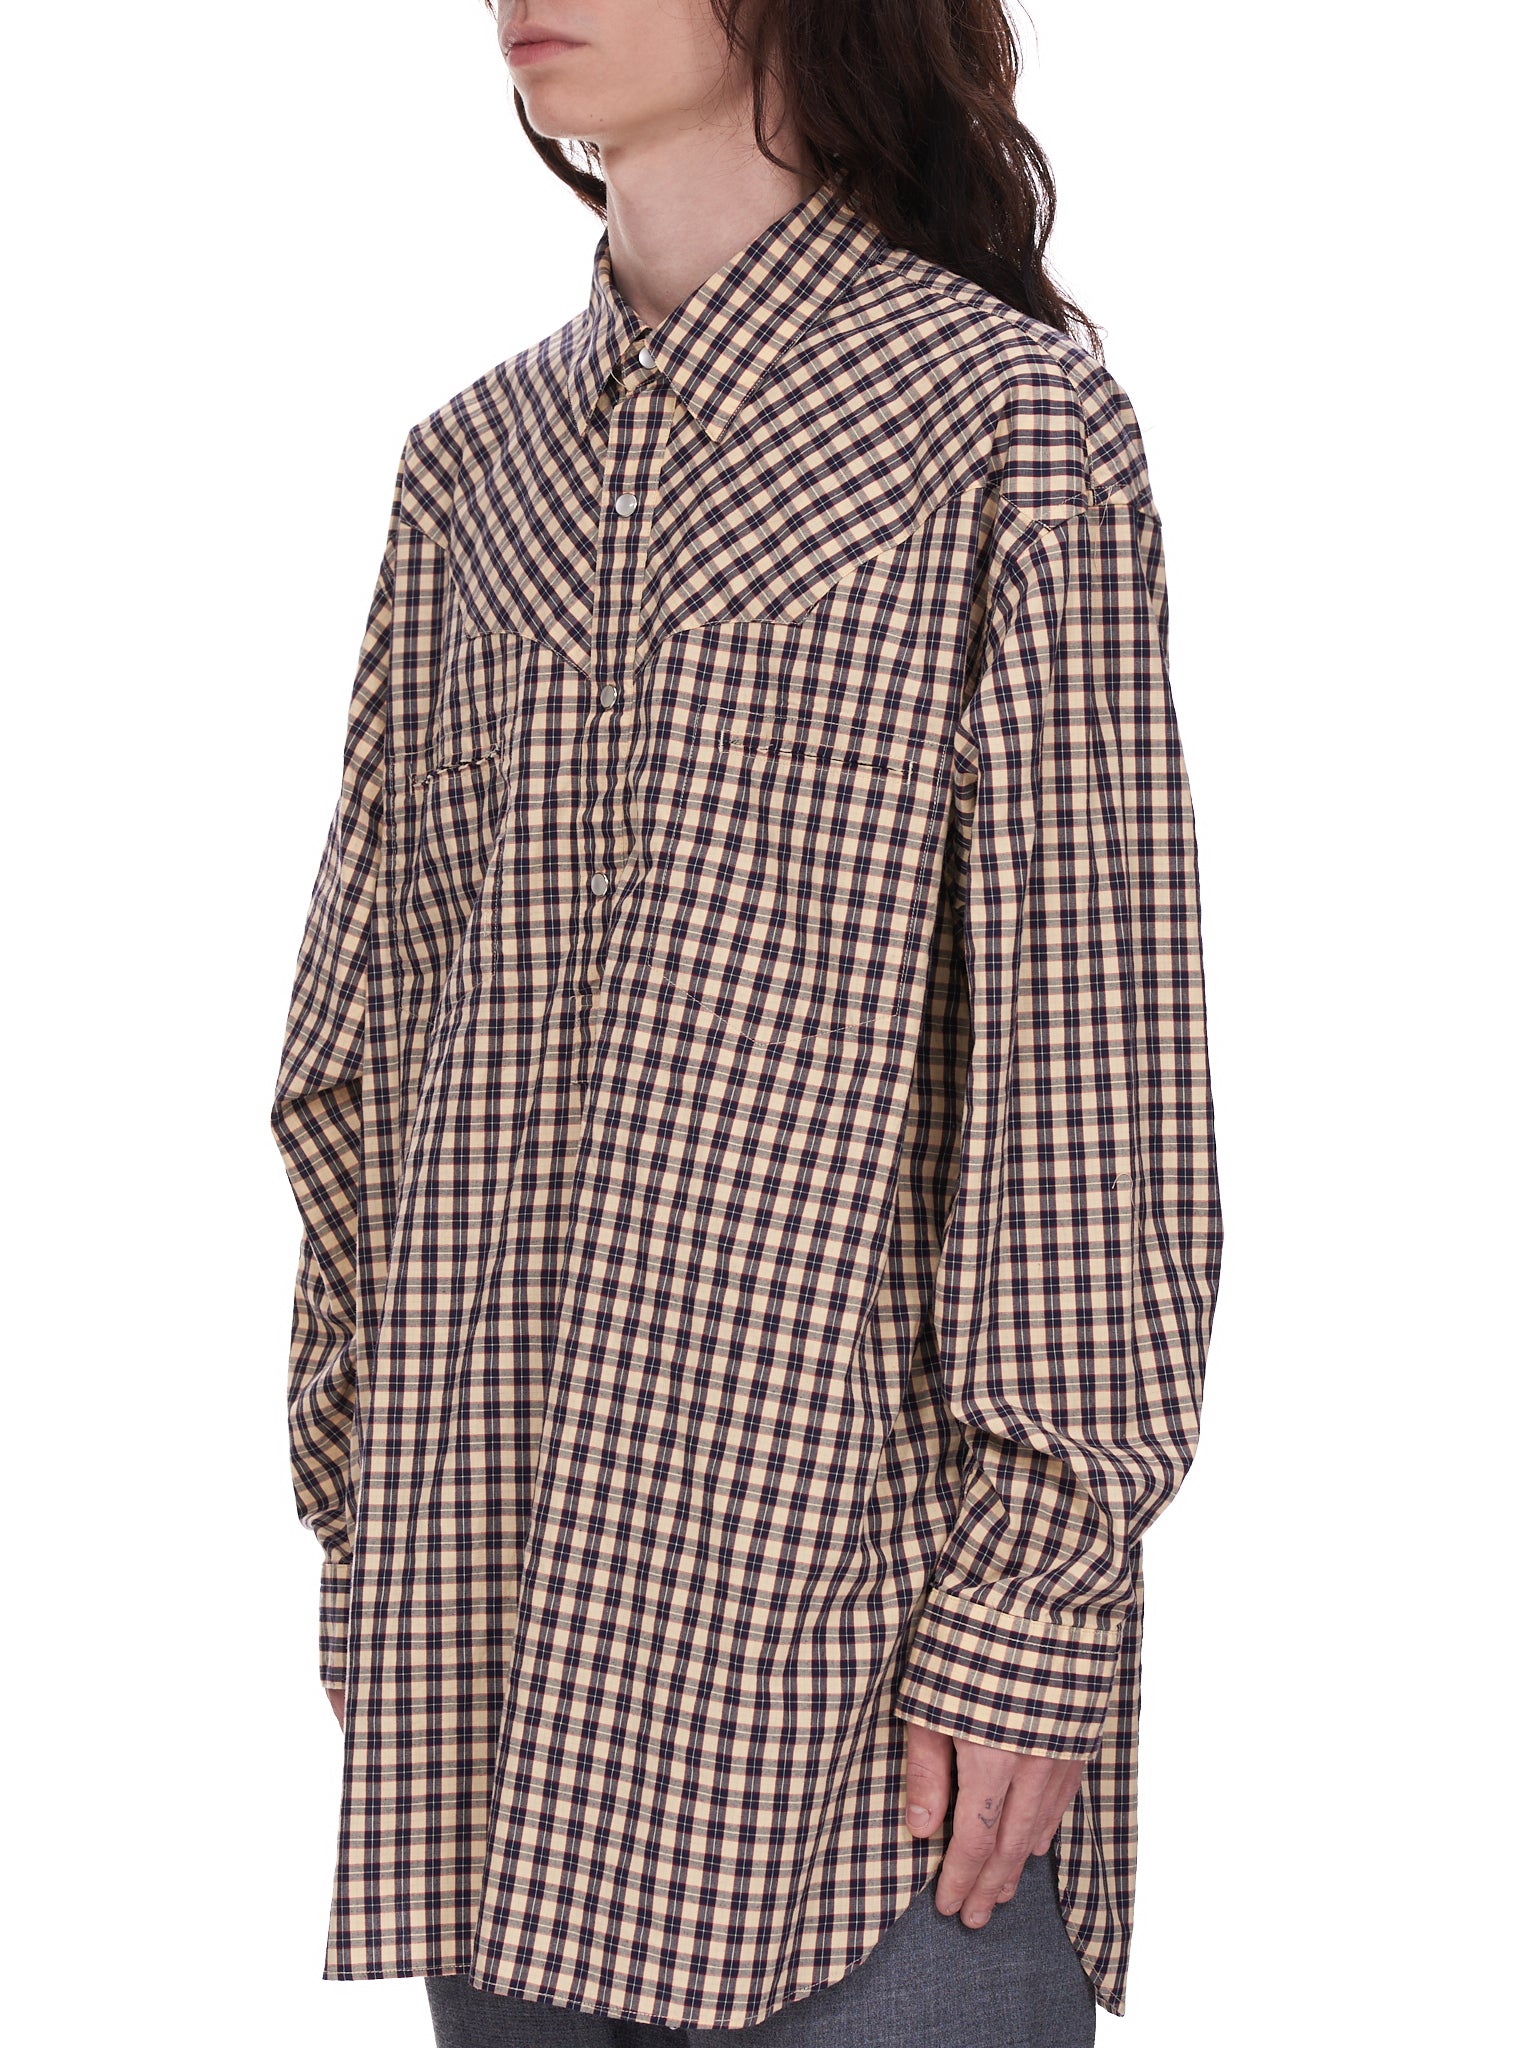 Undercover Plaid Top | H. Lorenzo - side 